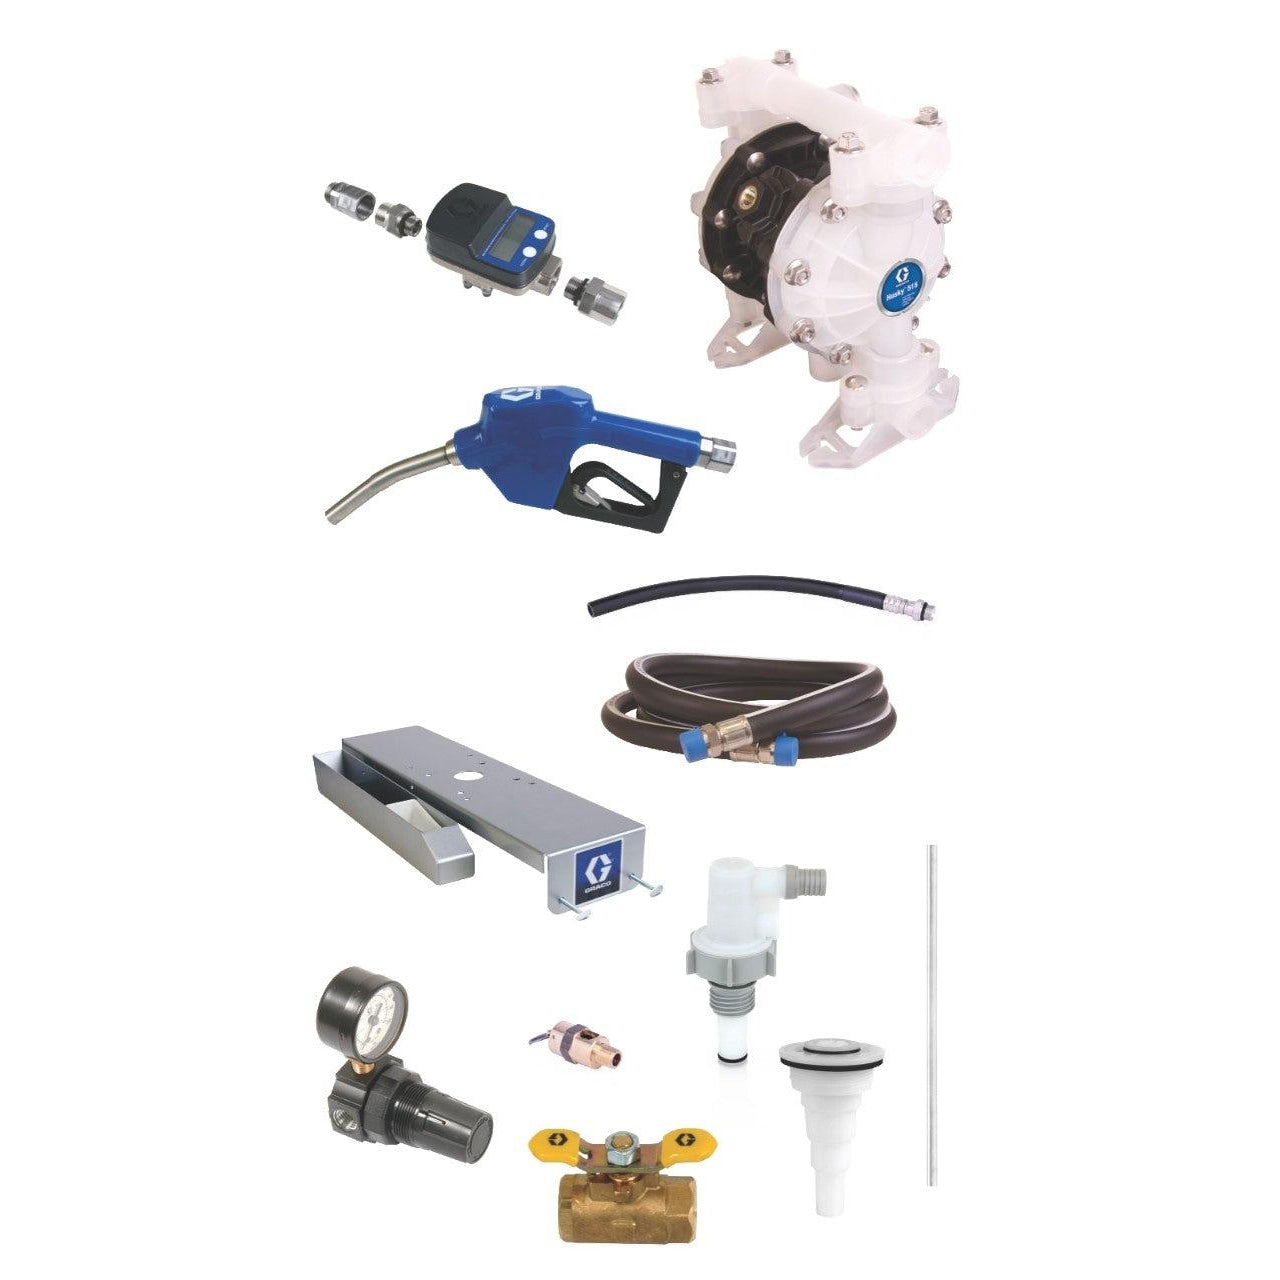 SDª Blue Pump Drum Package - 2 ft (0.61 m) Suction Hose Length - Automatic Nozzle - 3/4 in. BSPP Fittings